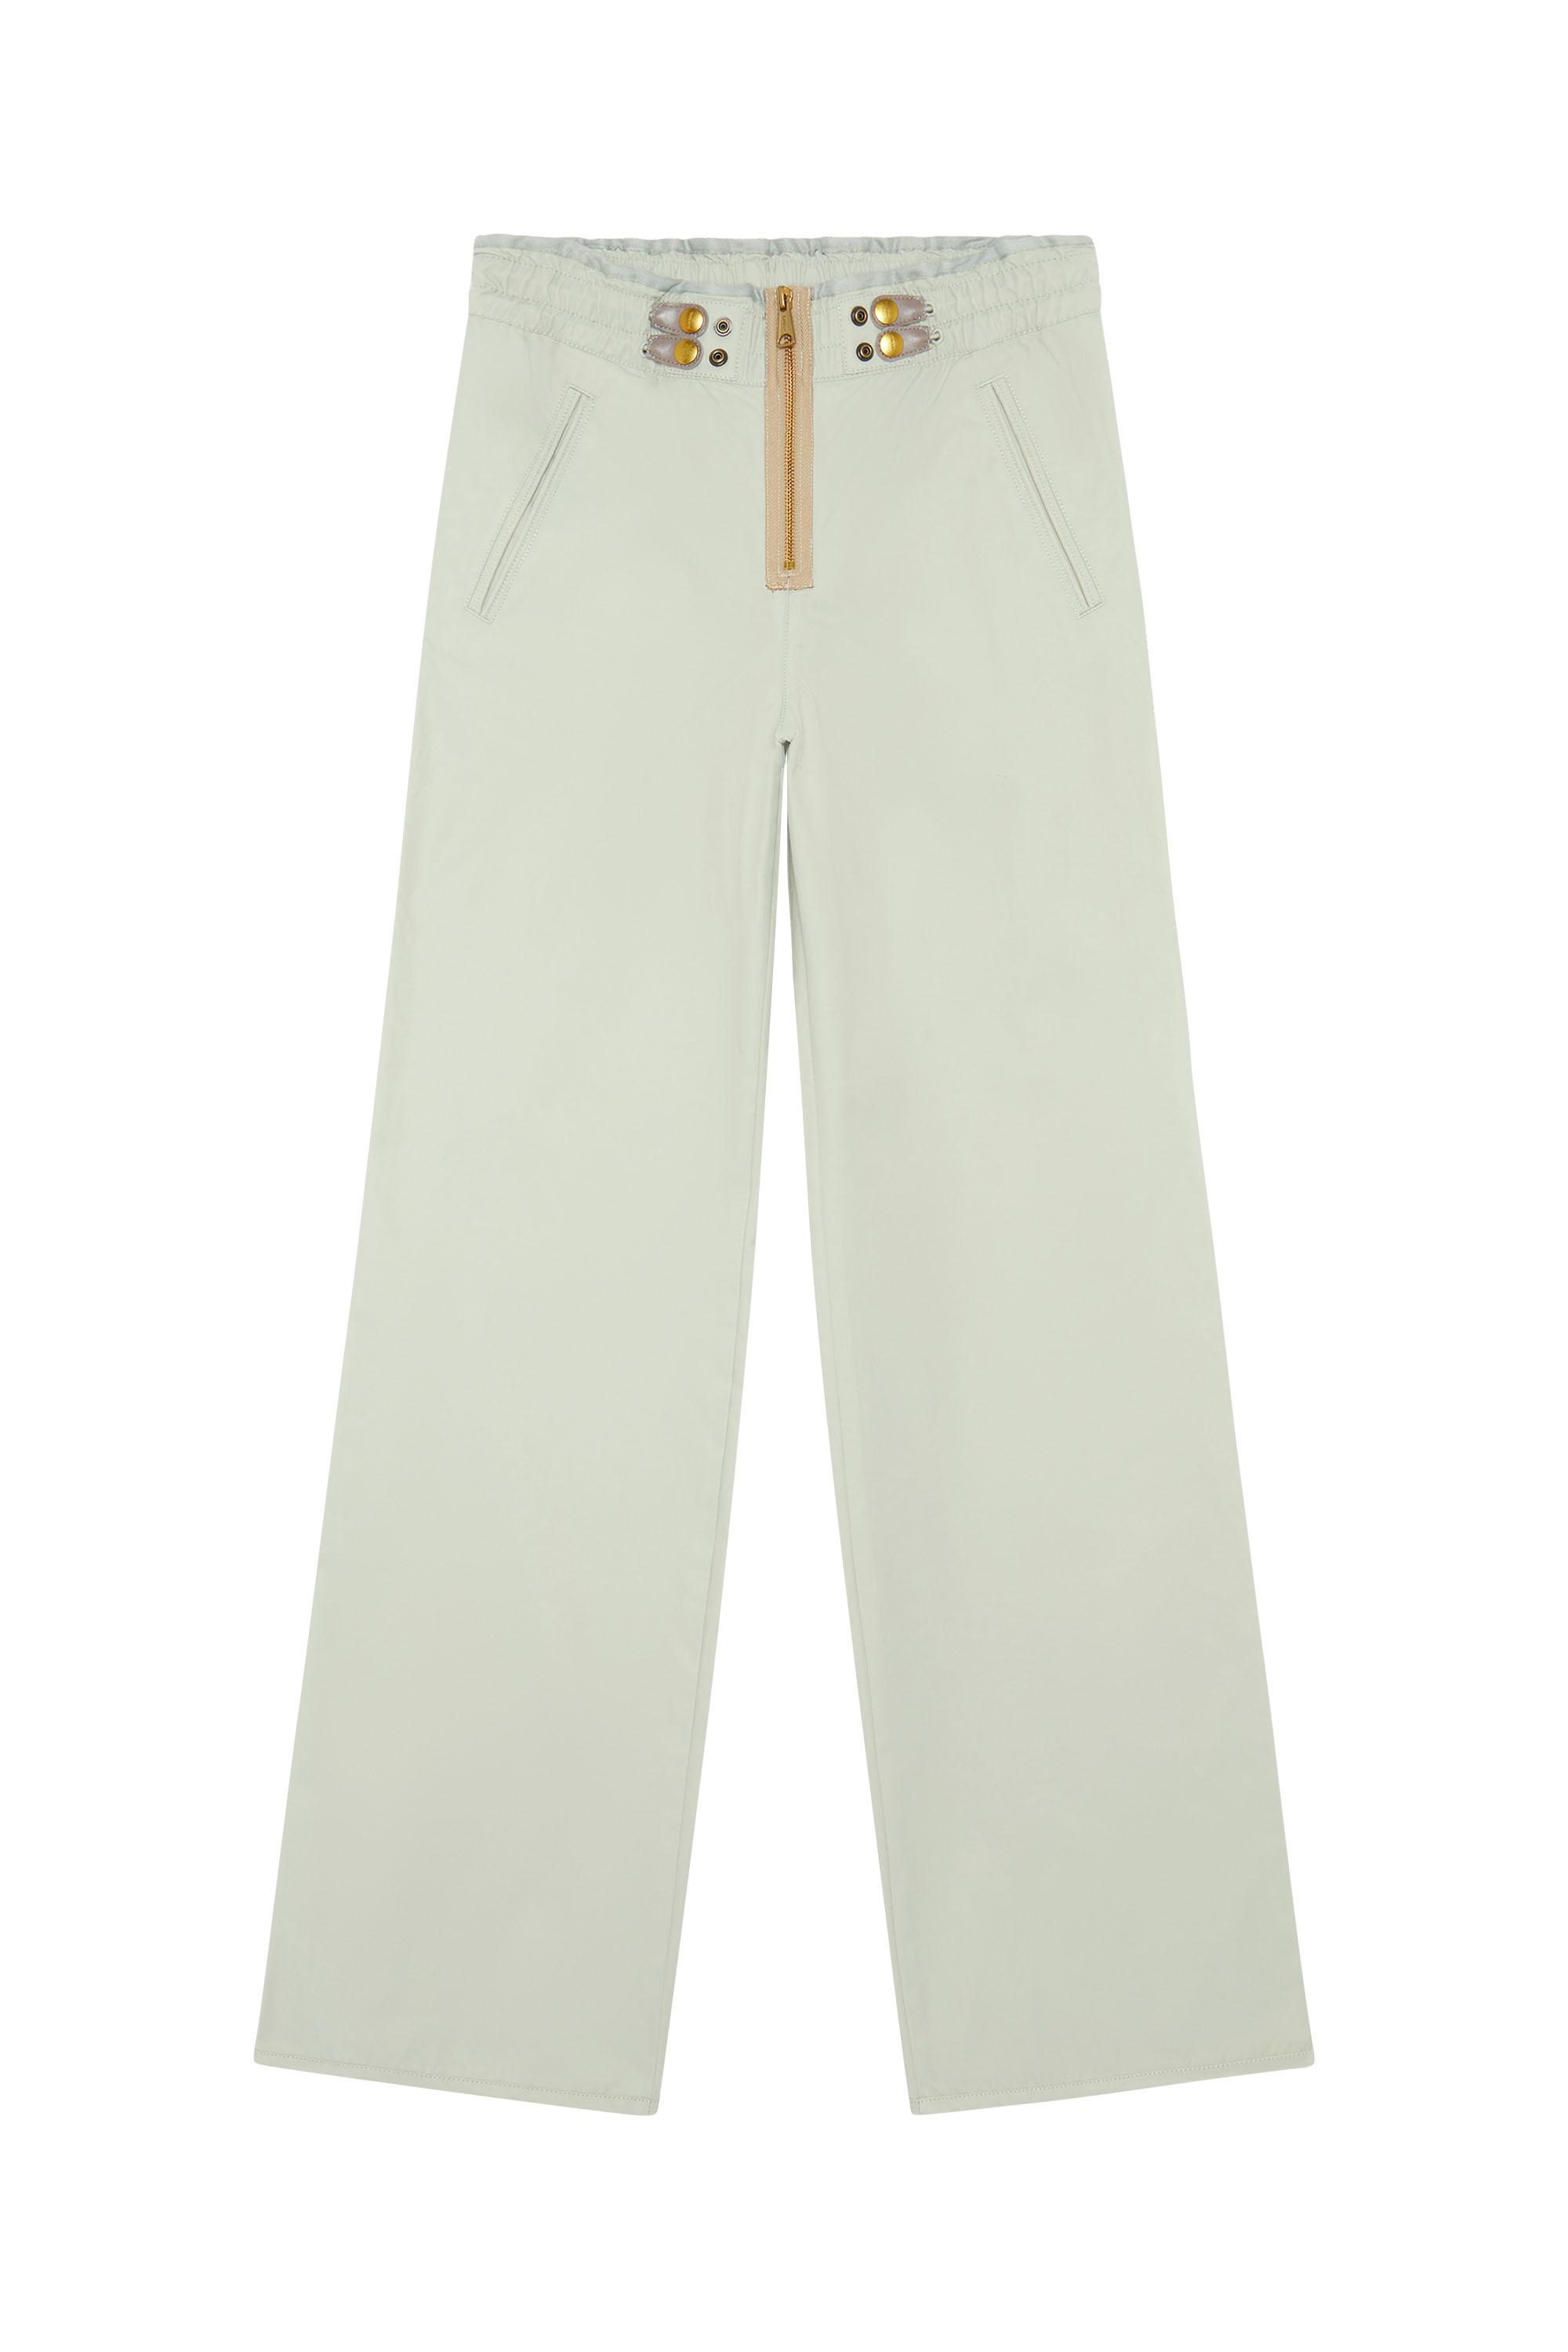 P-SMILACE Woman: Pants in cotton-blend twill | Diesel